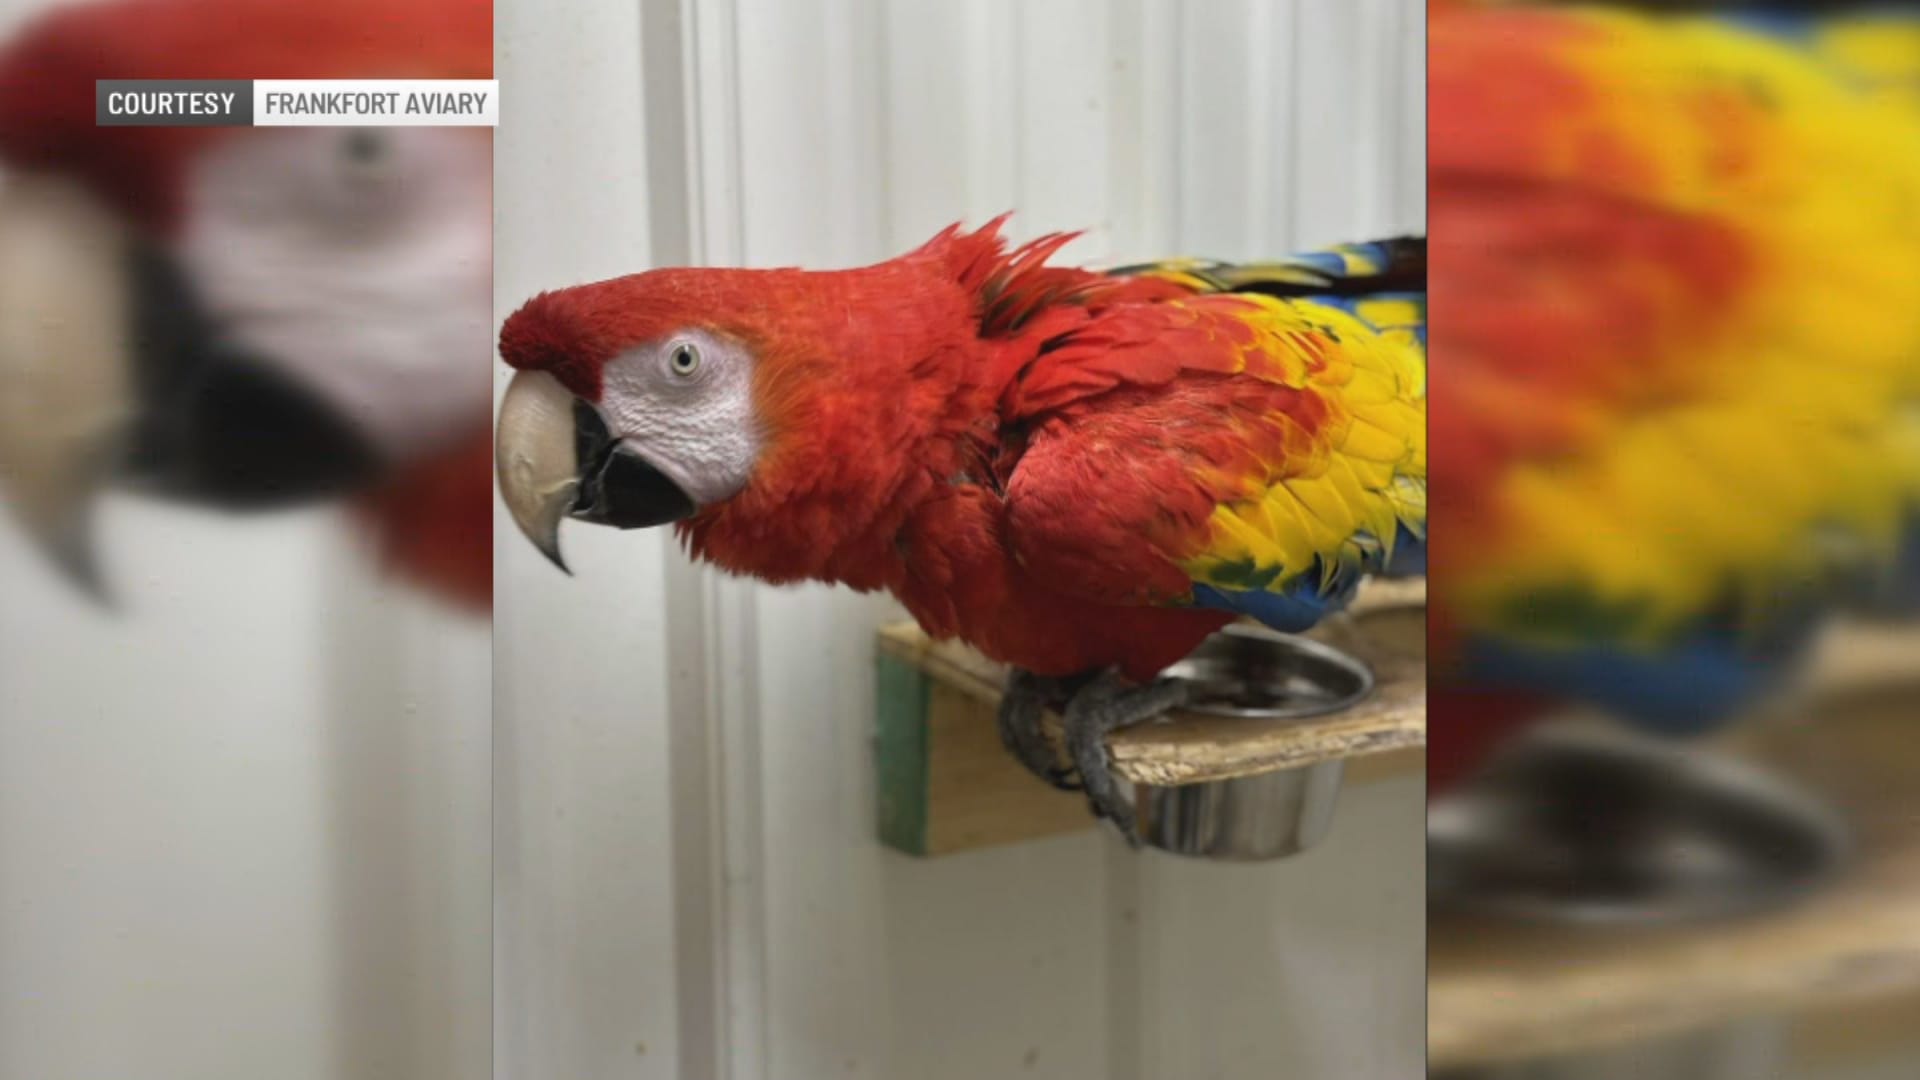 Birds worth $30,000 are stolen from central Indiana aviary